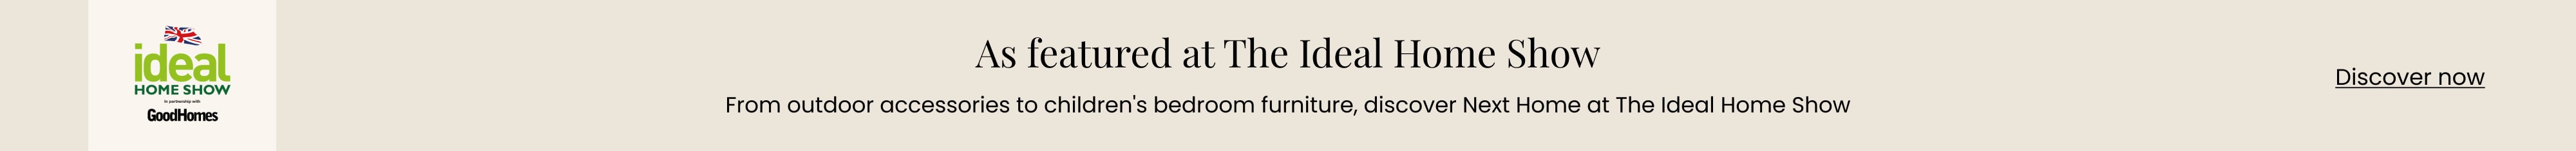 IdealHome_Banner_DT